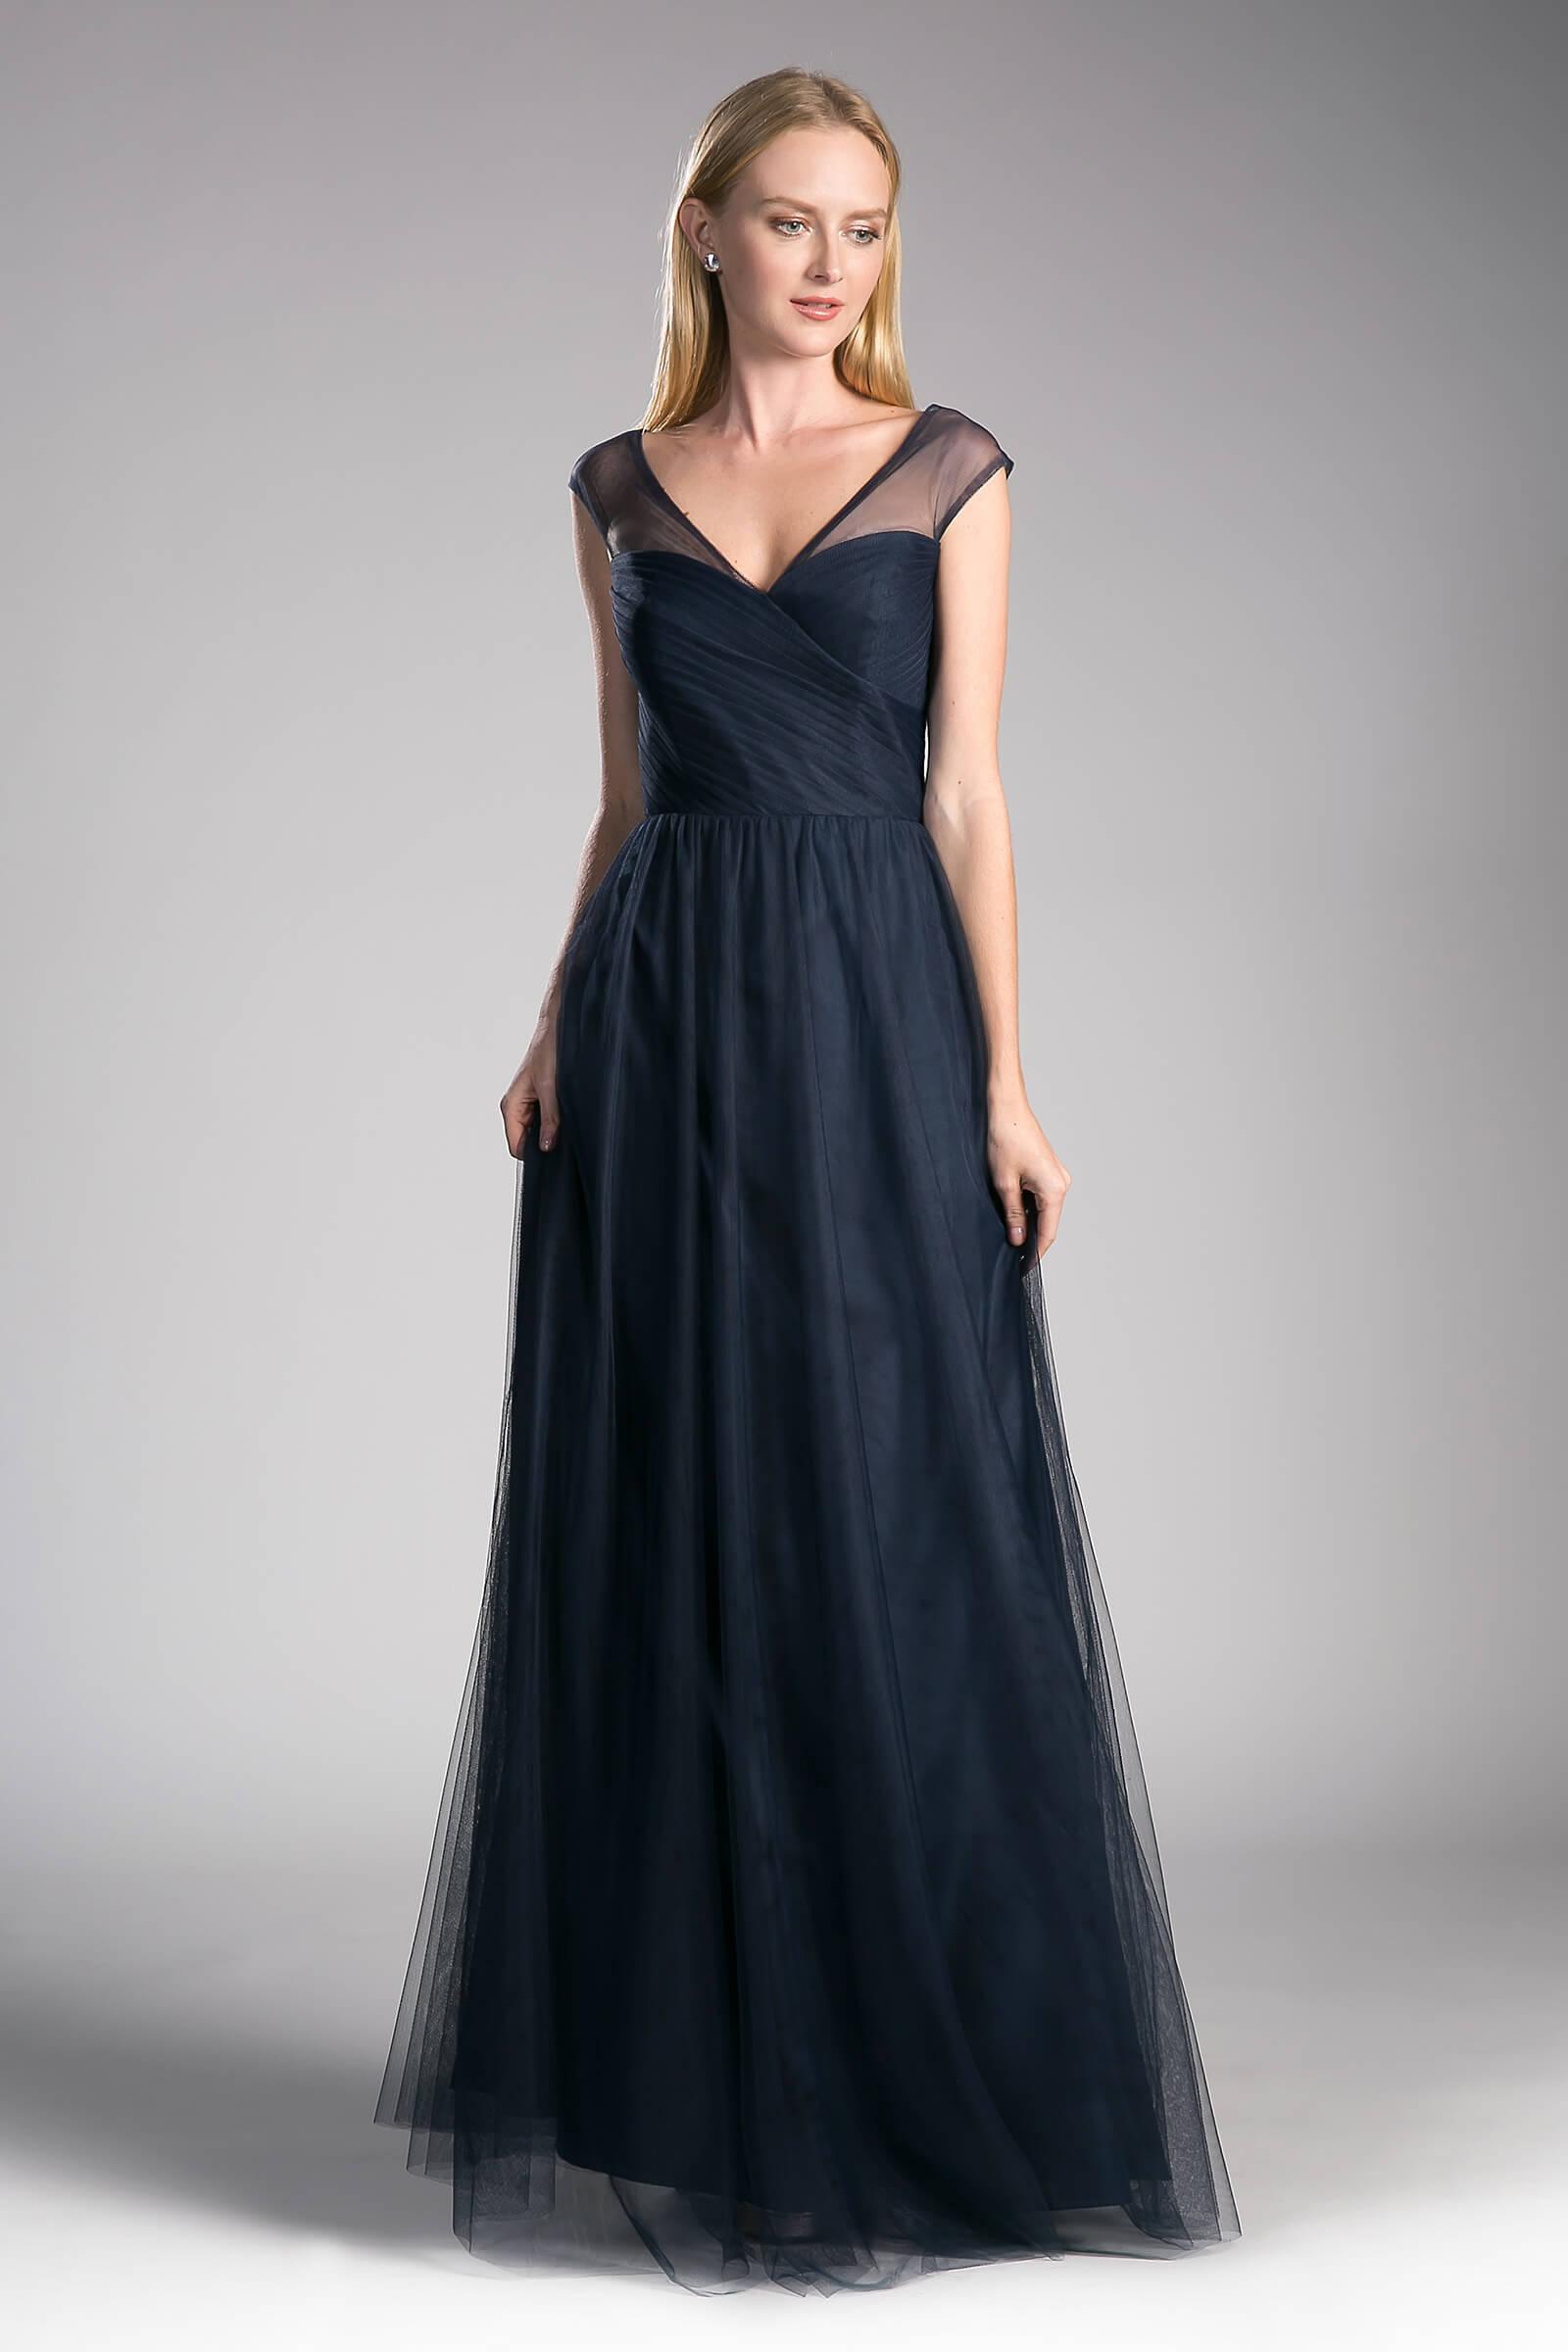 Long Plus Size Formal Dress Bridesmaid Gown Navy